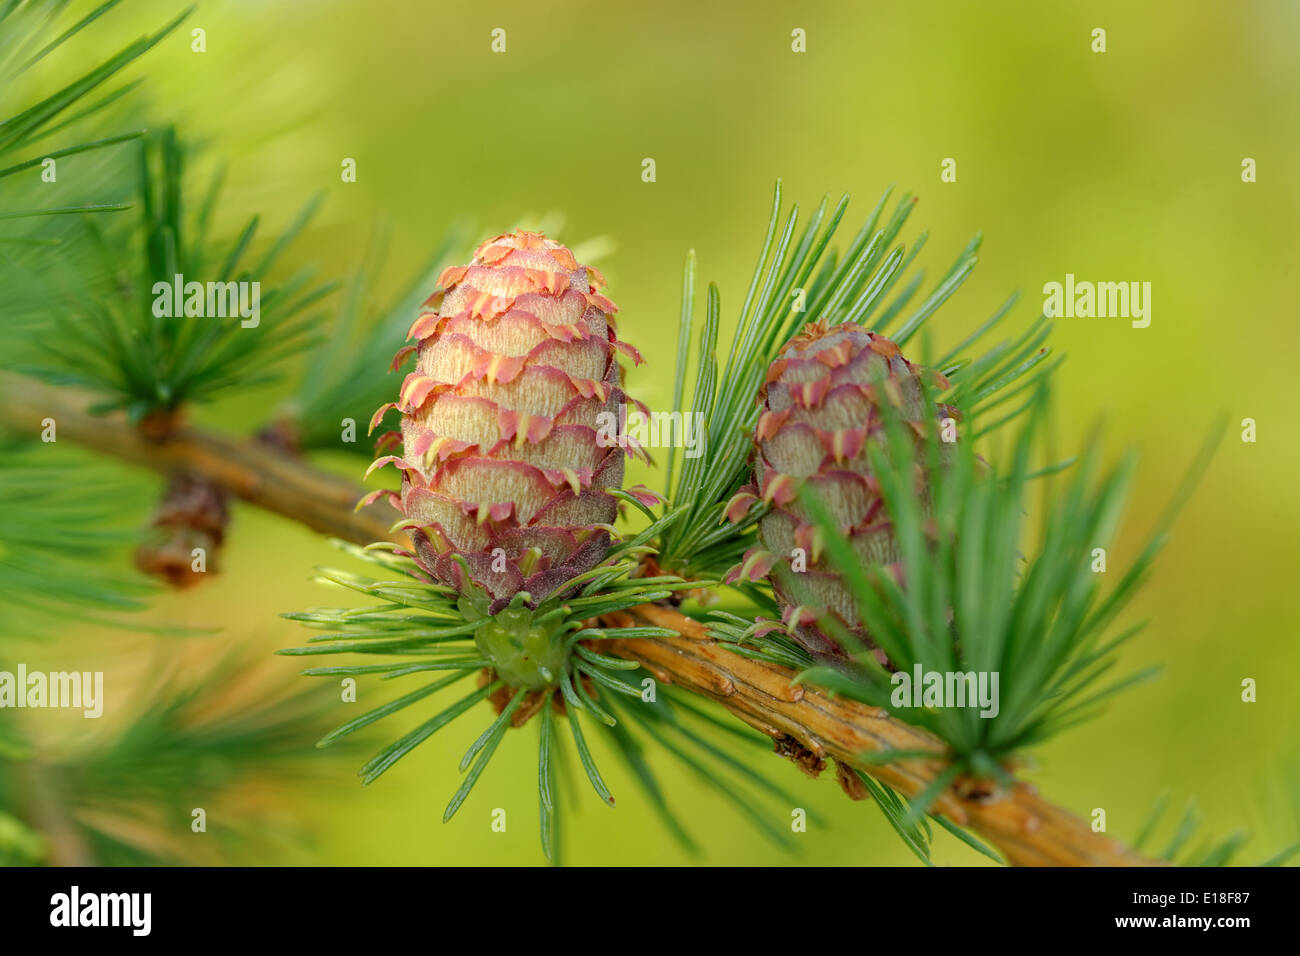 Ovulate cones (strobiles) of larch tree, spring, May Stock Photo